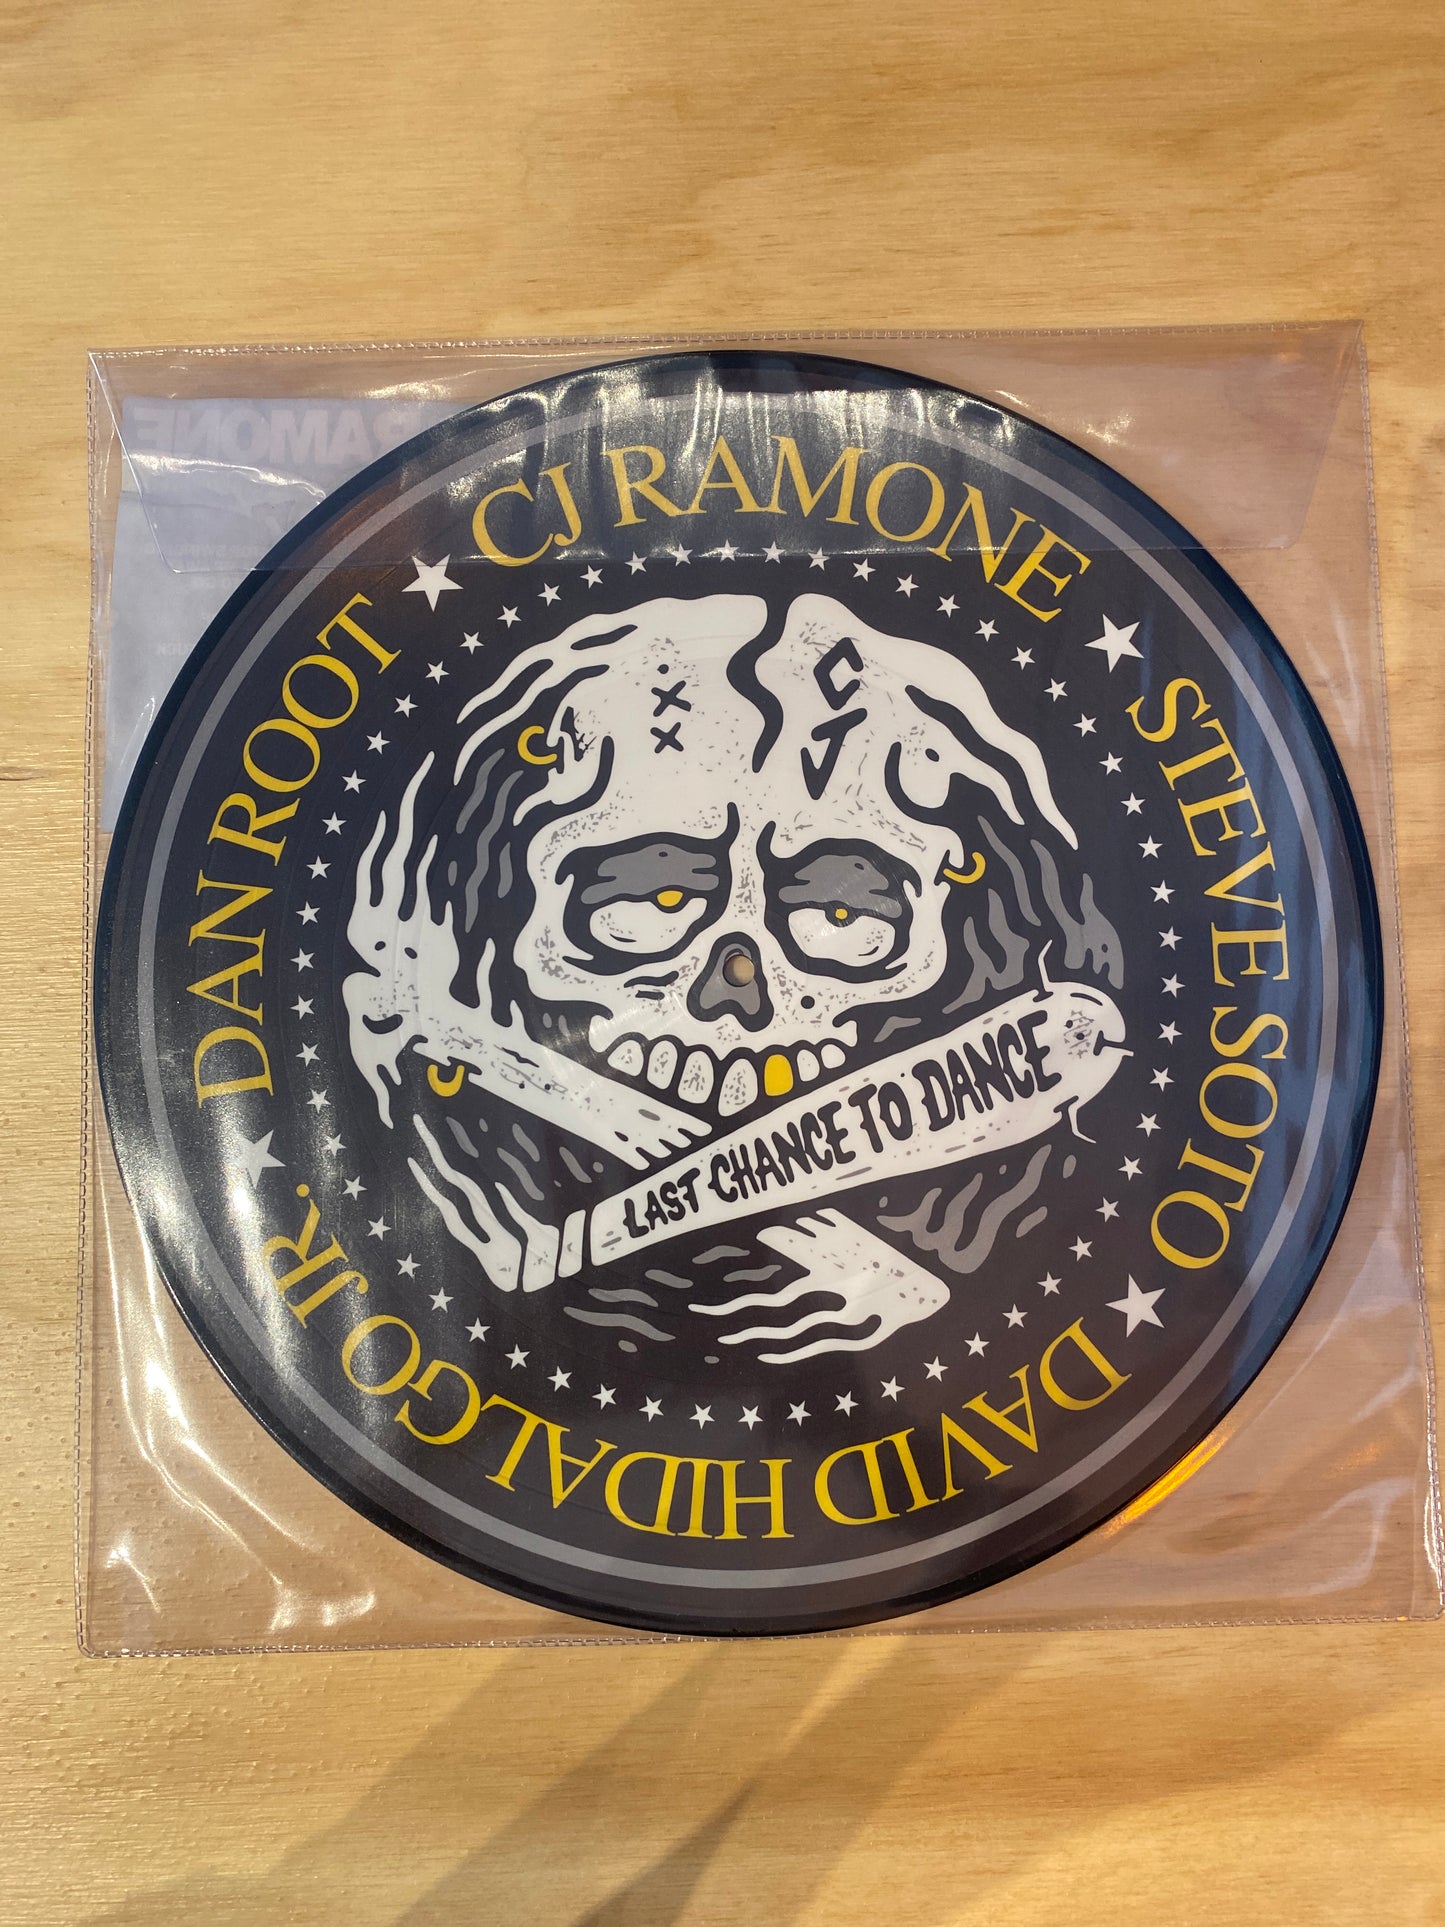 Cj Ramone - Last Chance To Dance (Limited Picture Disc)